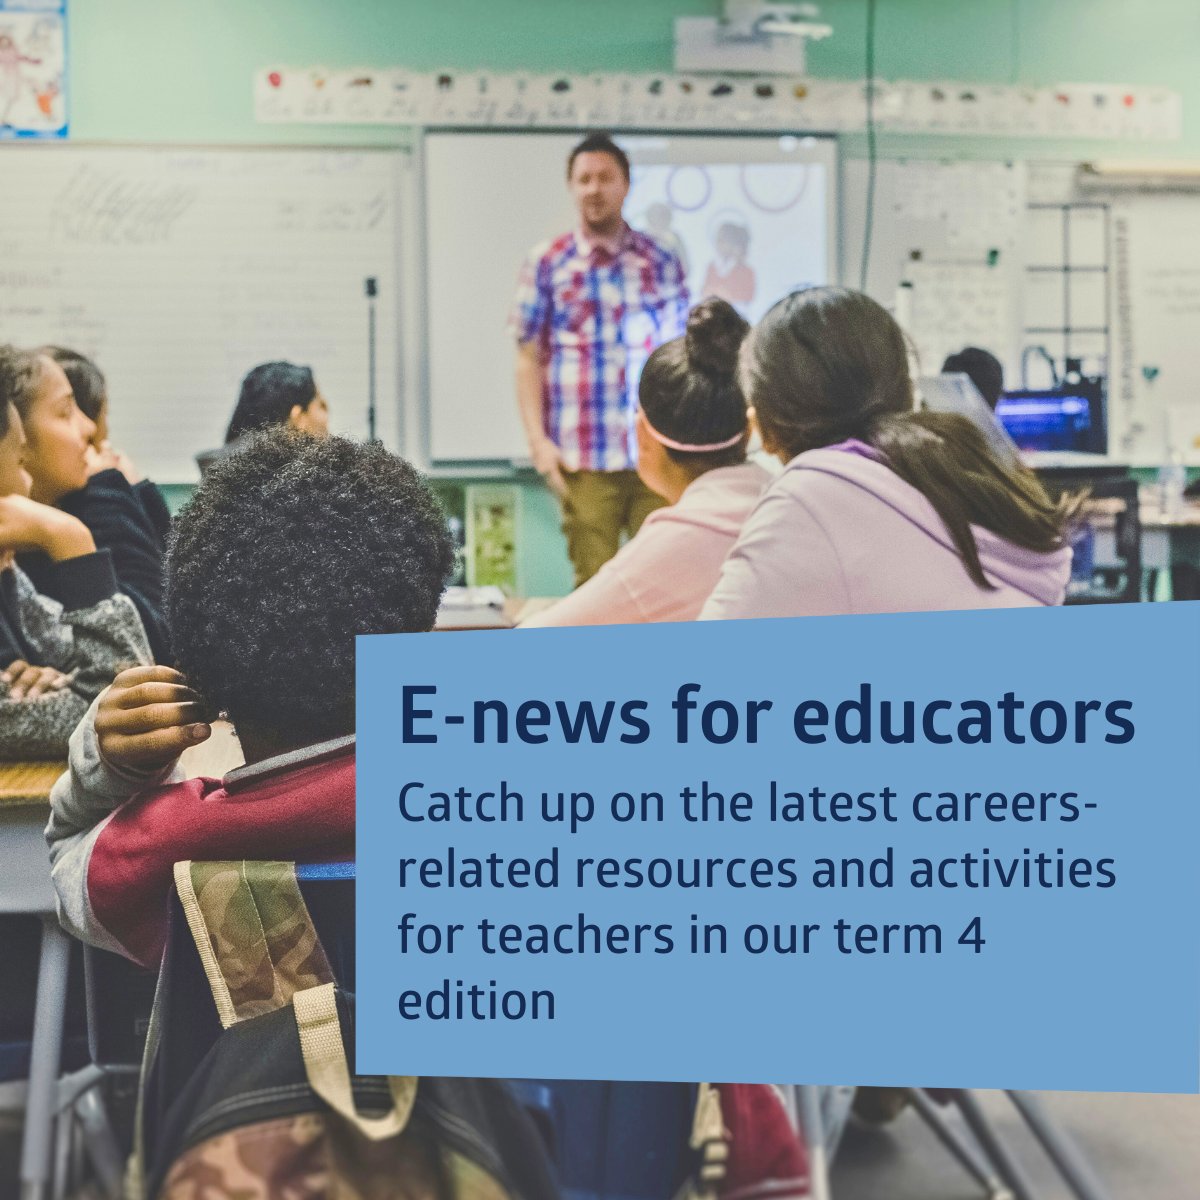 Calling all teachers 📢 Our term 4 e-newsletter for educators is now live🌟 It's full of the latest links to help you access careers-related resources and activities for your pupils 💡 Catch up on the issue here 👉 bit.ly/4a8Fq7J